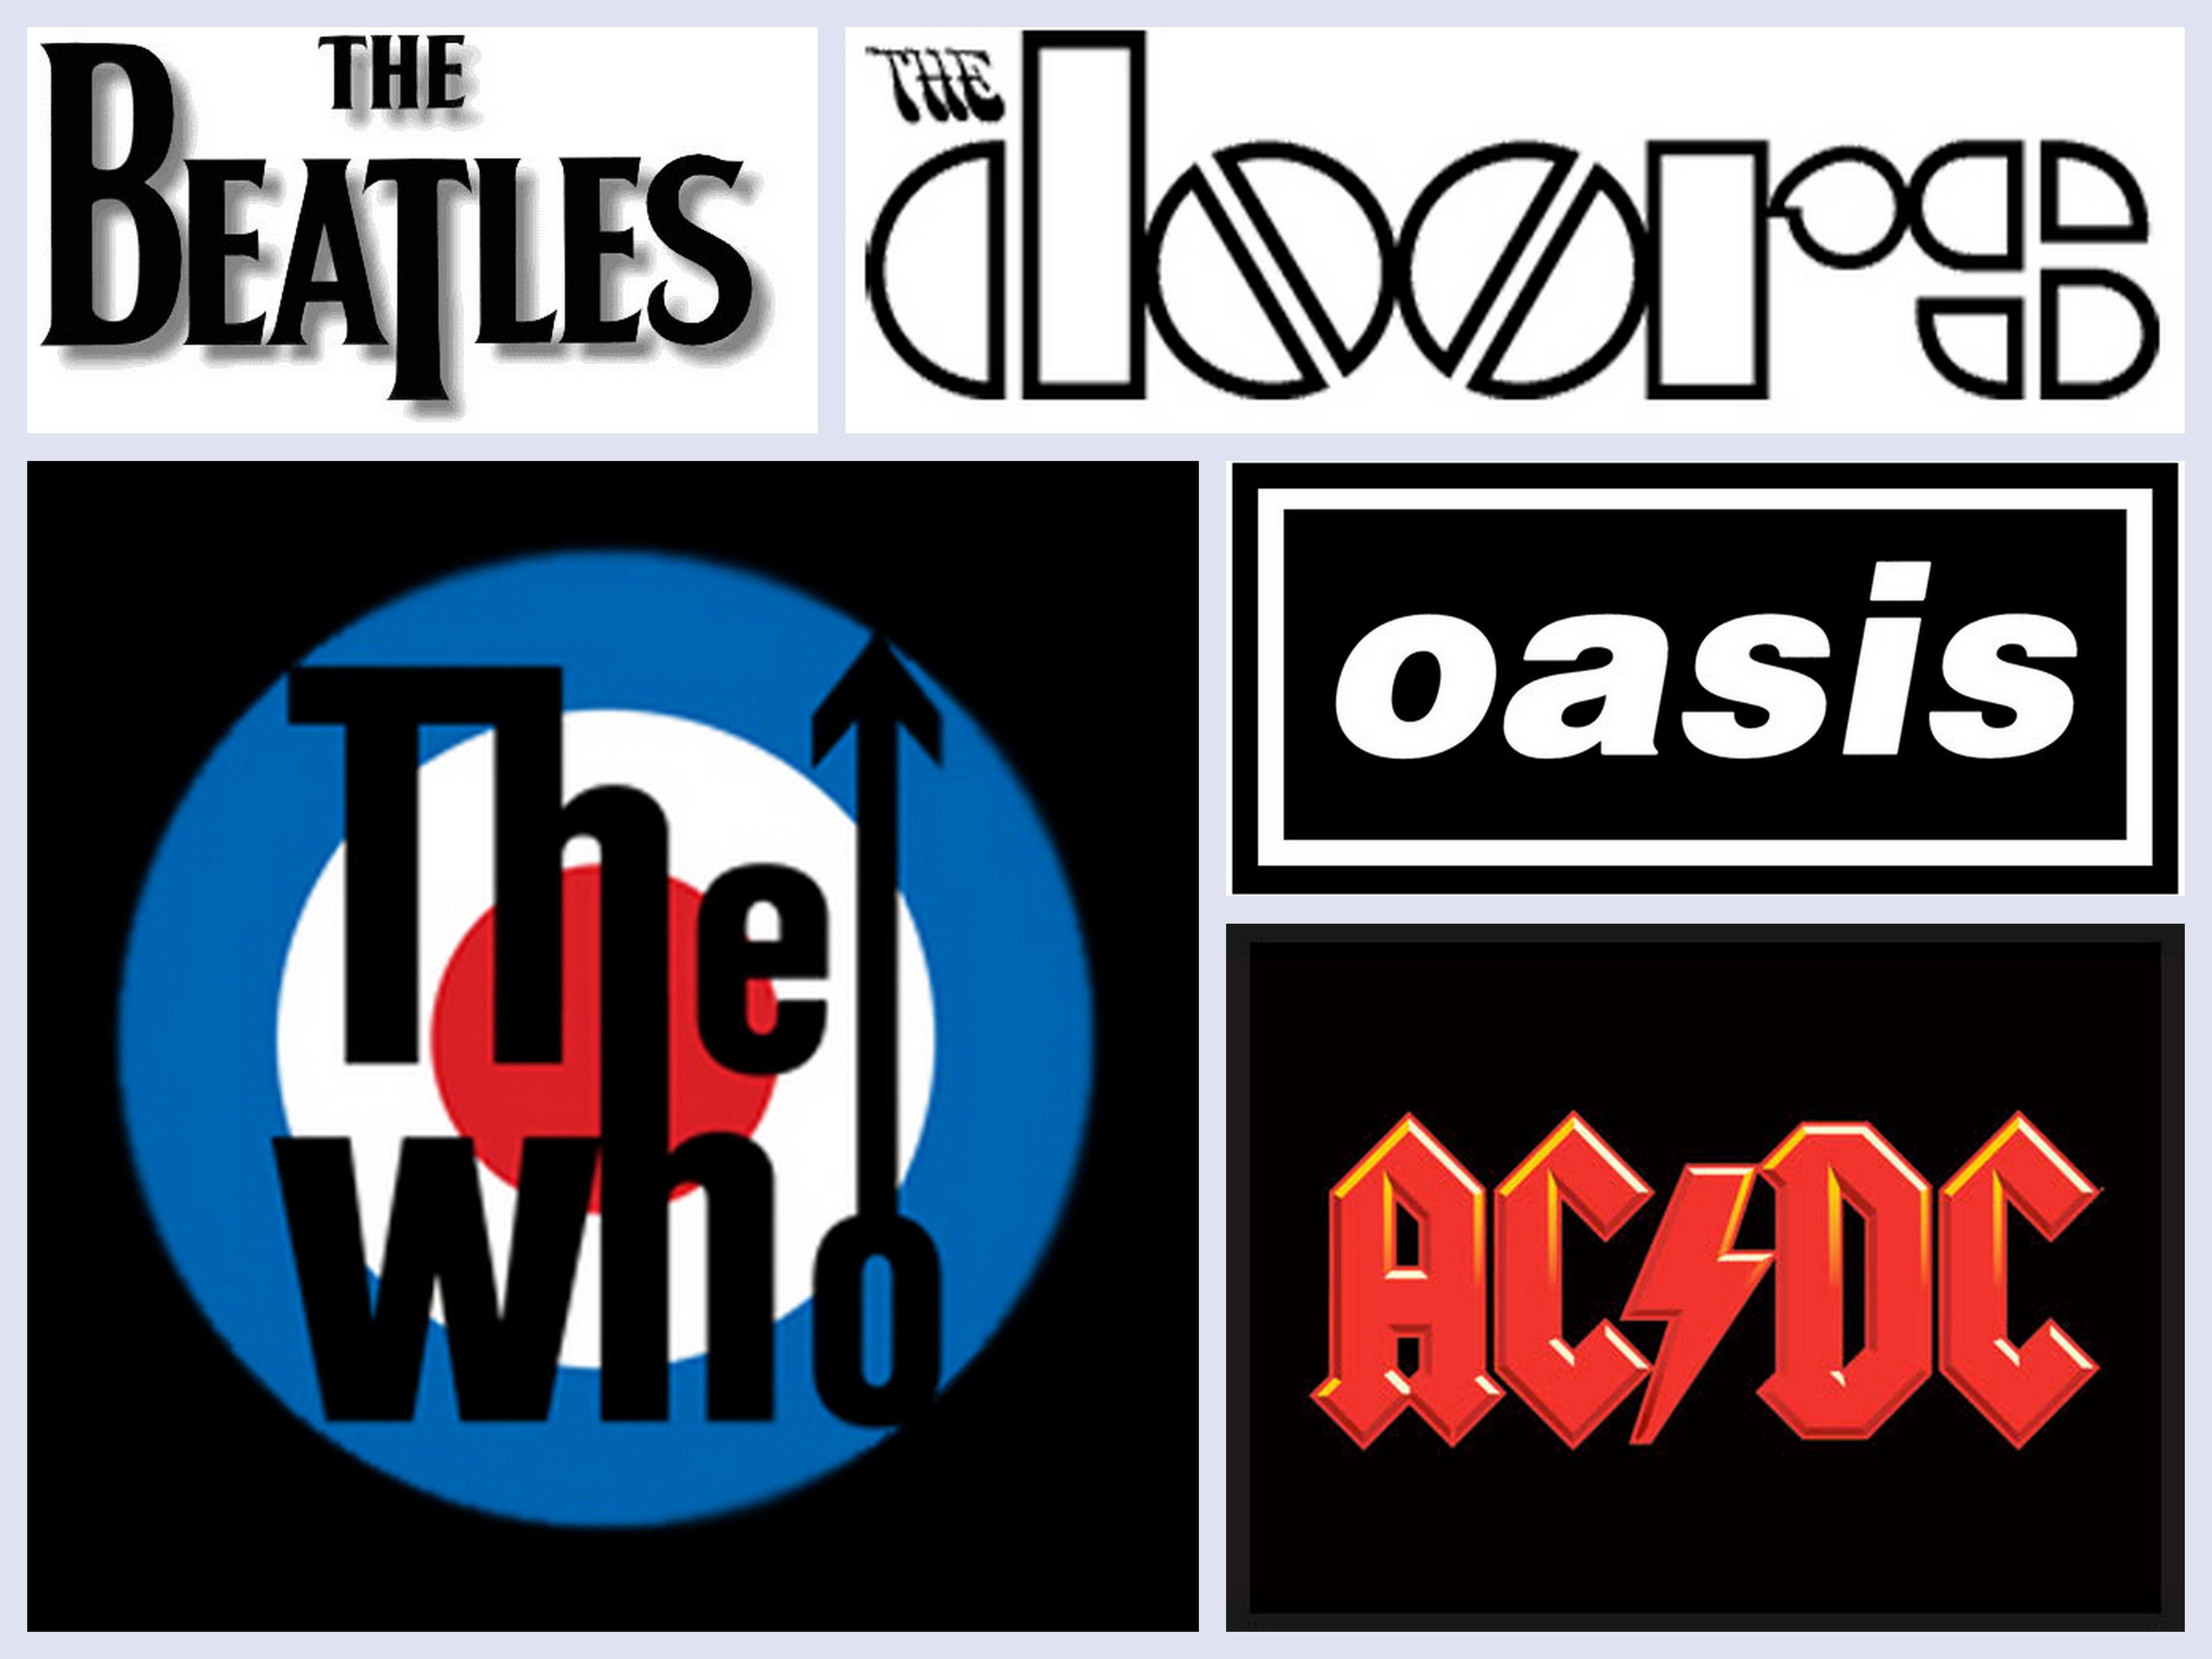 Iconic Rock Band Logo - List of Synonyms and Antonyms of the Word: iconic band logos